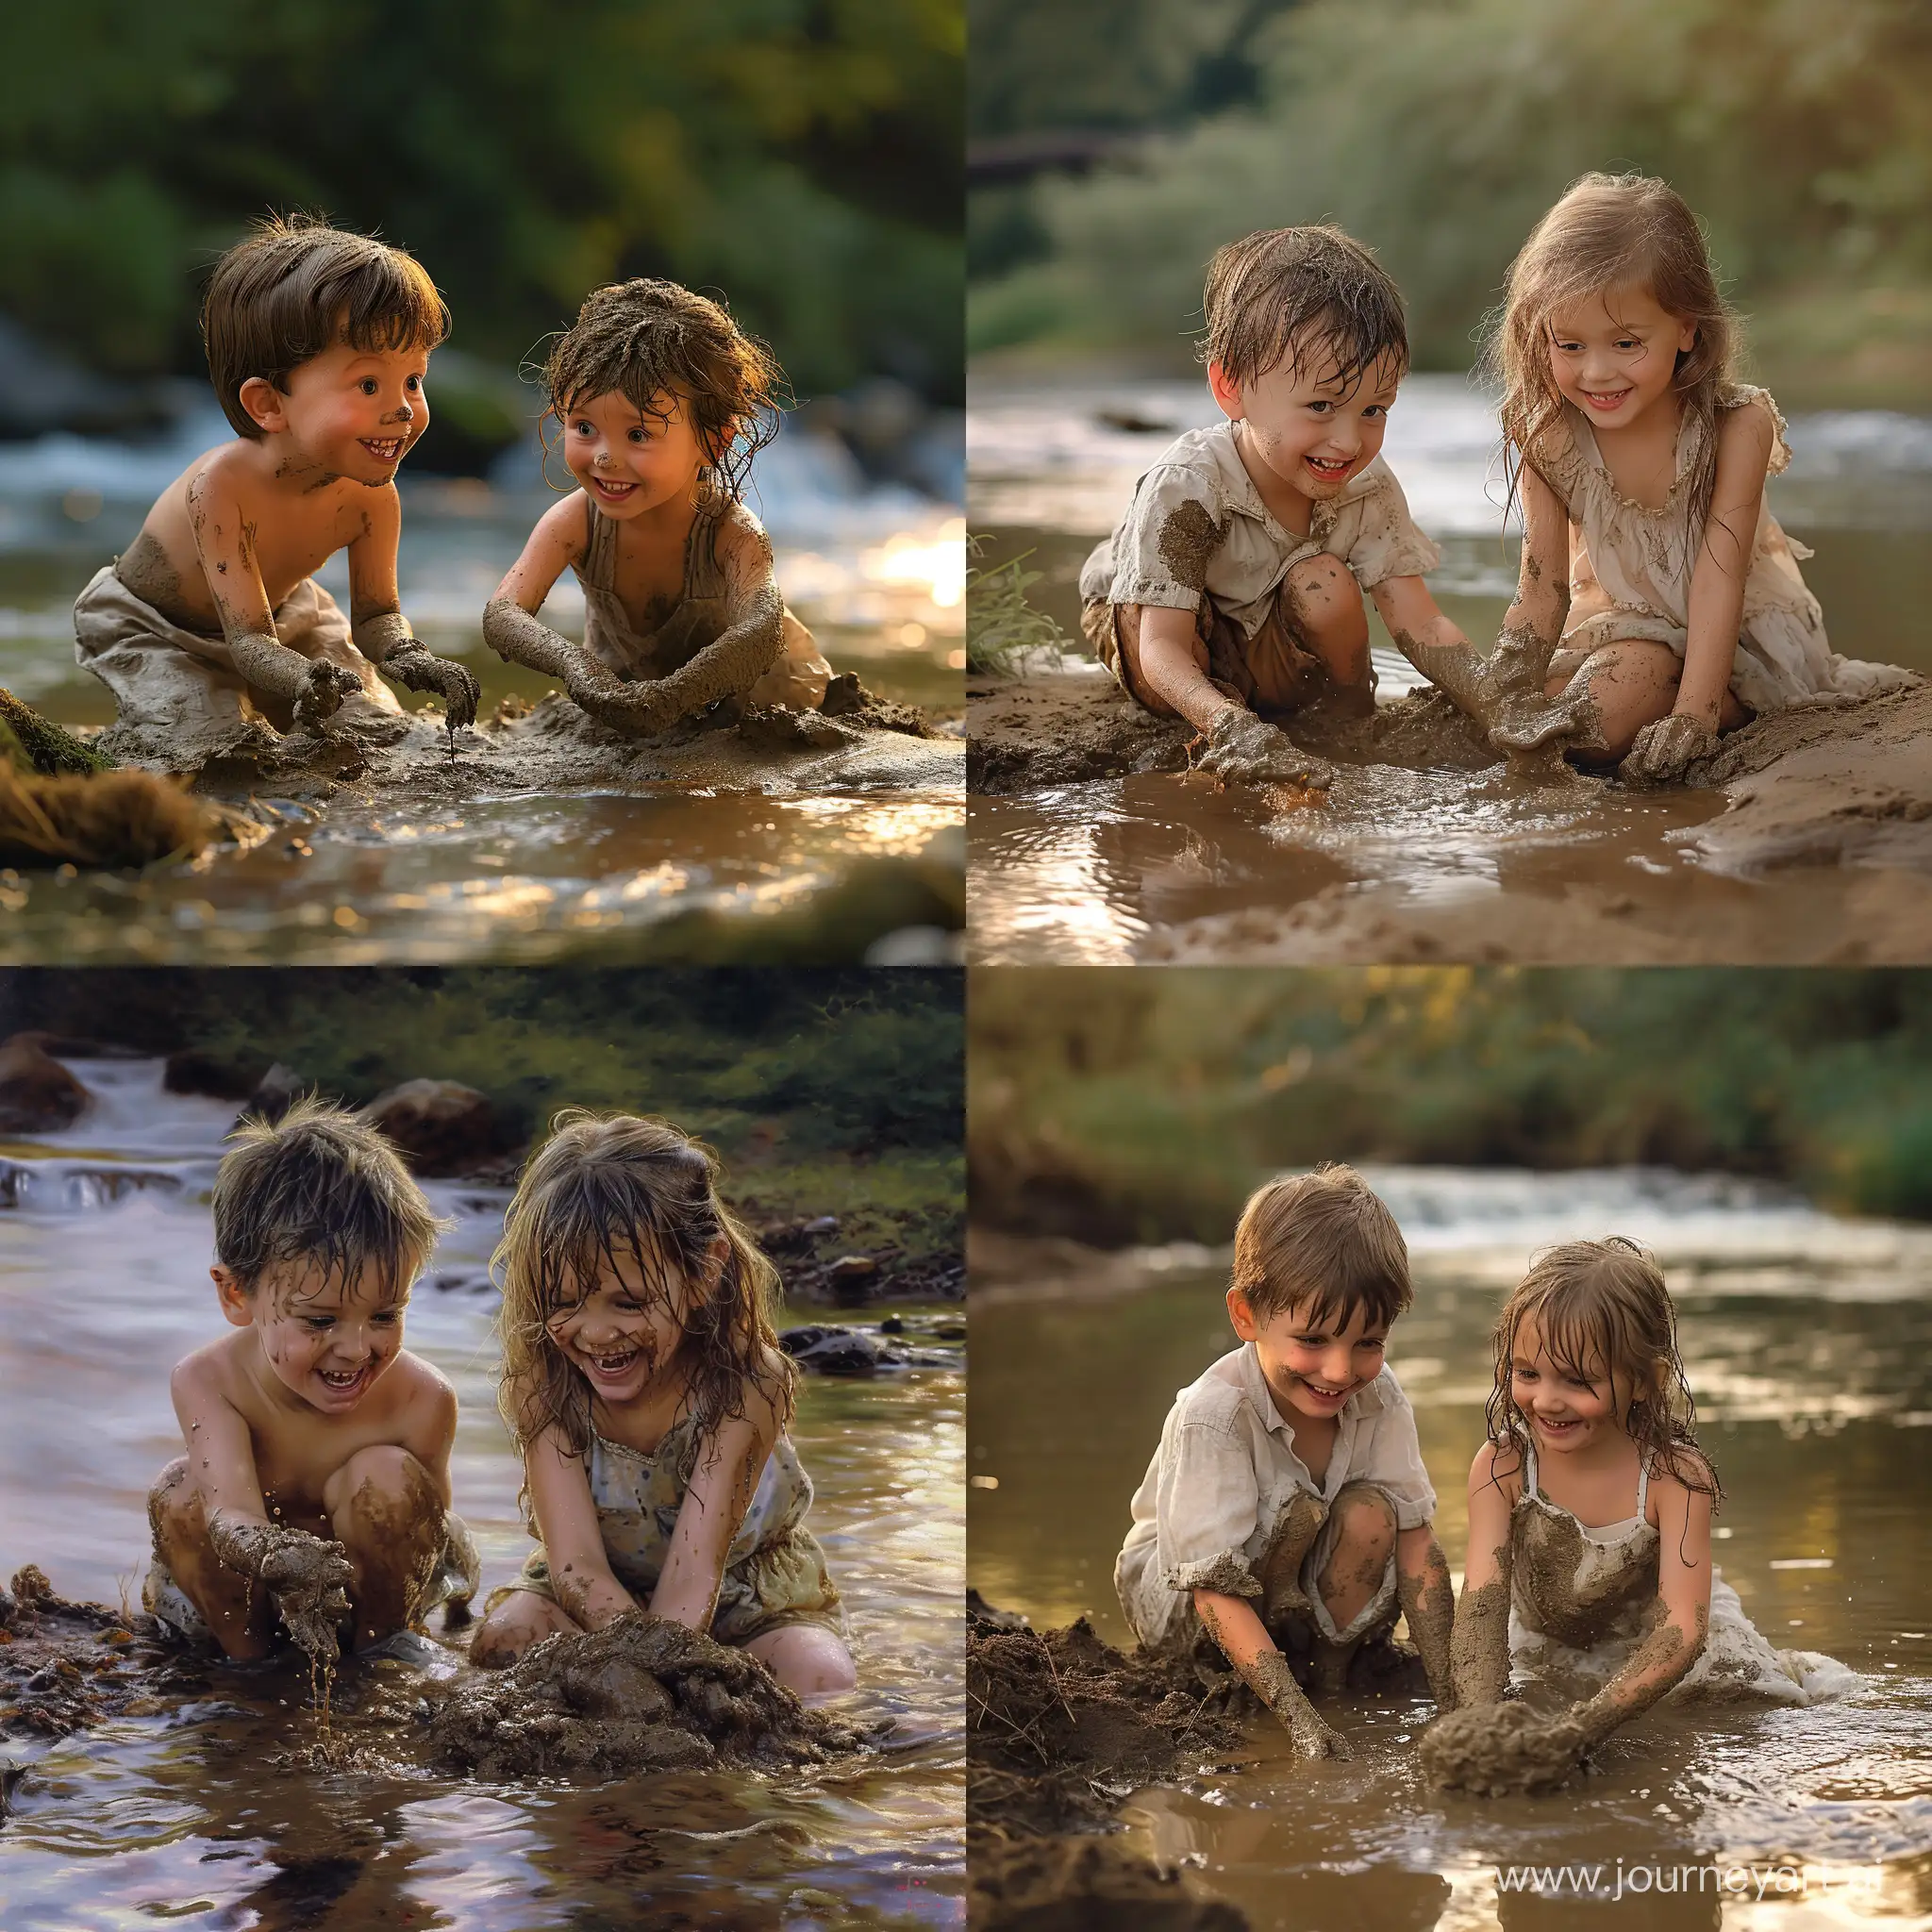 Joyful-Children-Playing-by-the-River-in-Mud